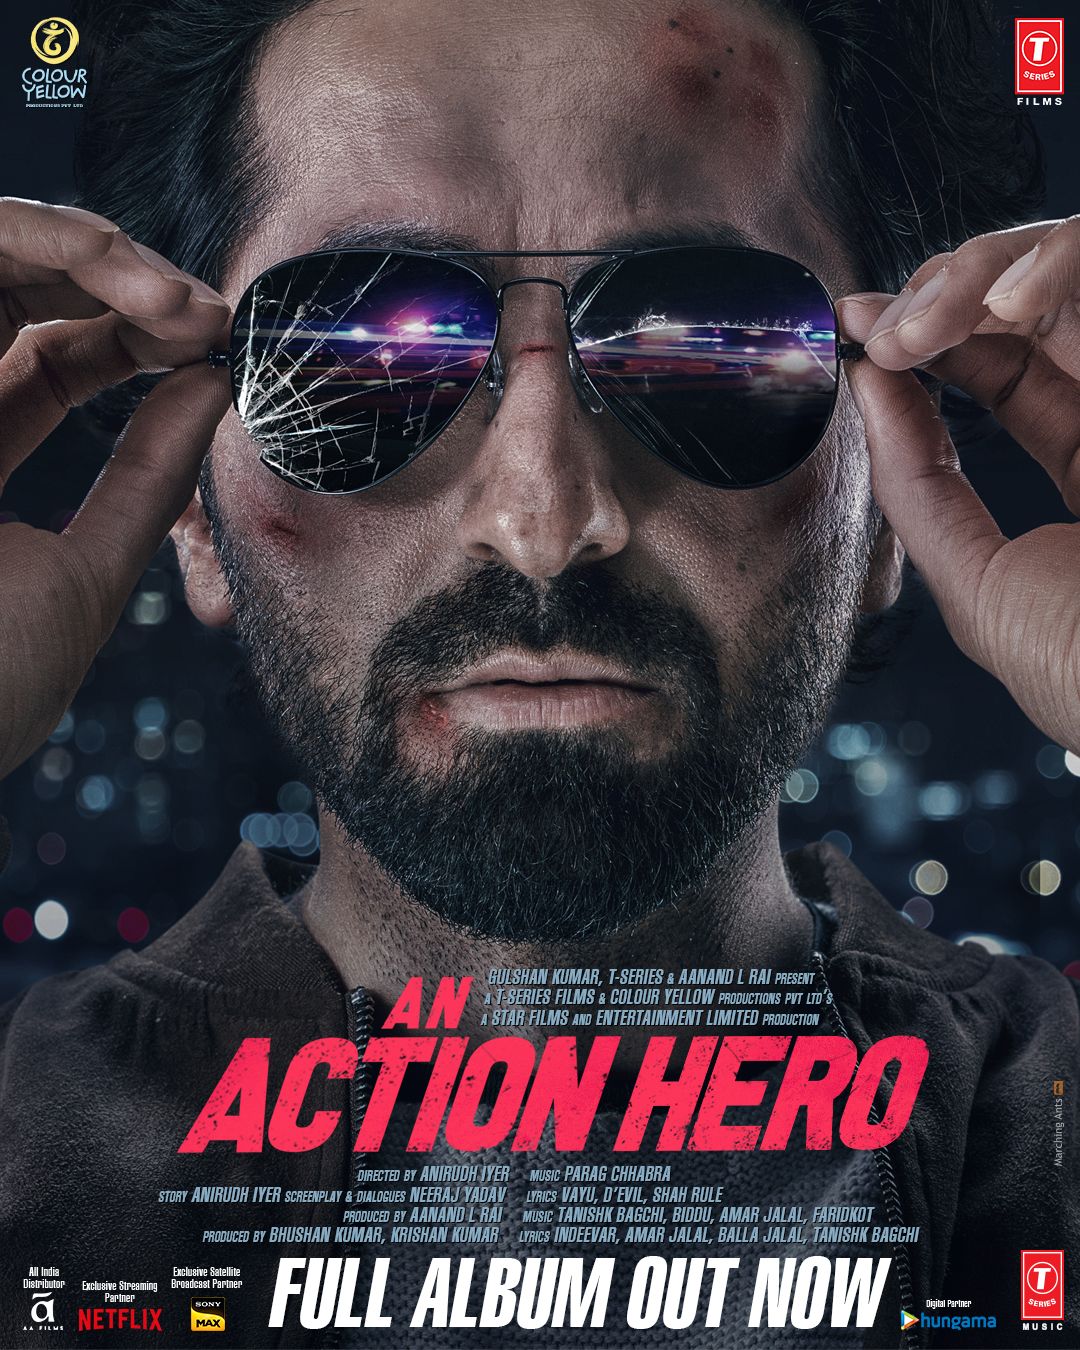 An Action Hero Cast and Crew, Image, Stills, Gallery, First Look, Posters, Teaser, Trailer, Promo, First Single, Review, Ratings, Release Date, Wallpaper